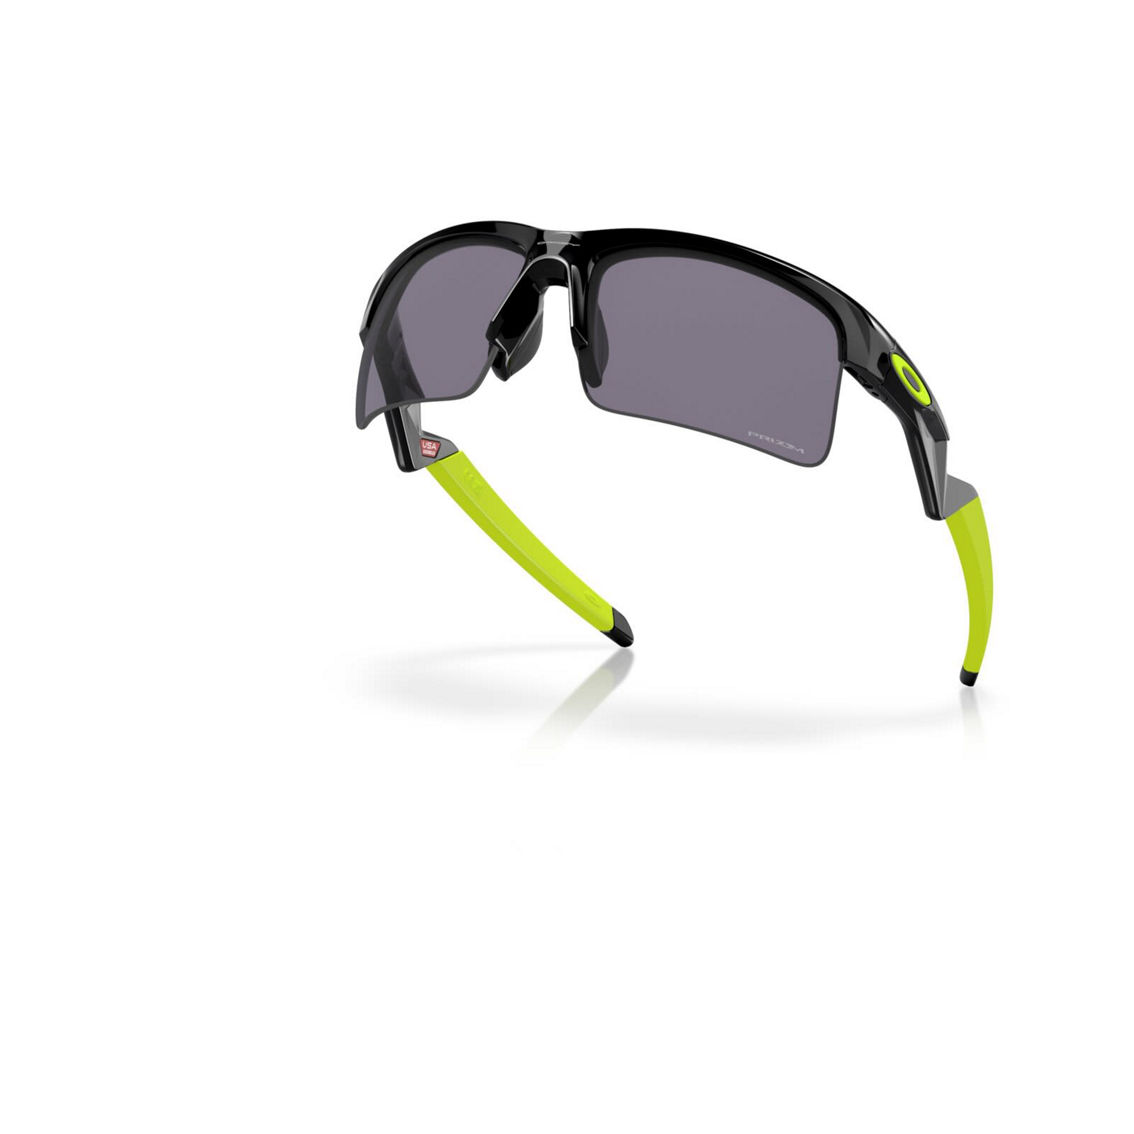 Oakley OJ9013 Capacitor (Youth Fit) - Image 5 of 5